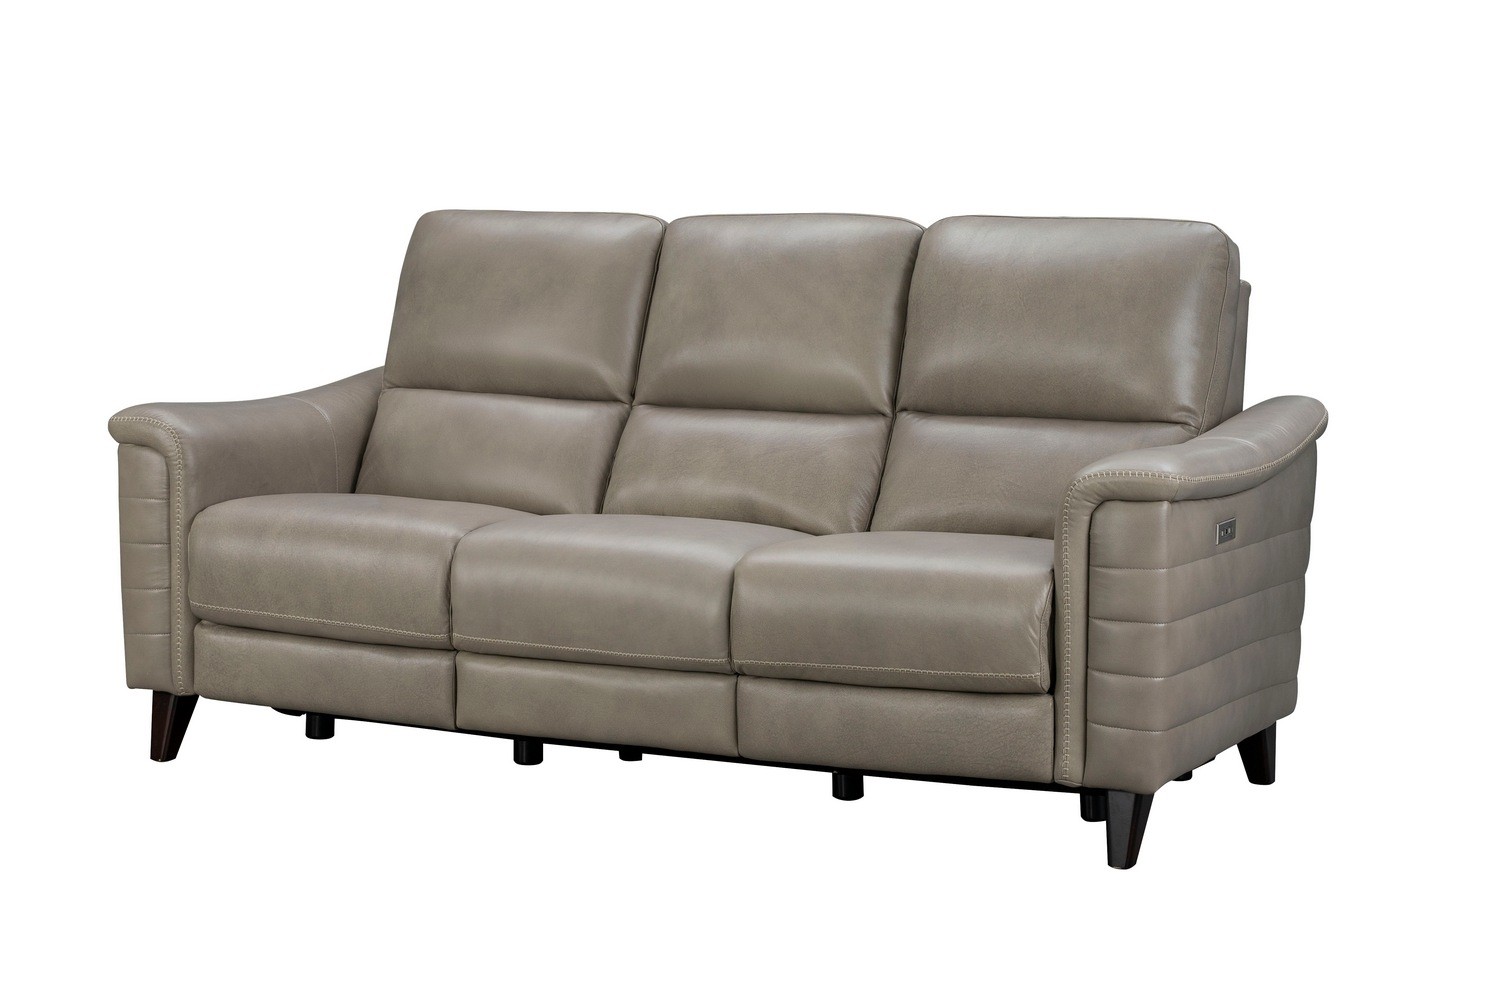 Barcalounger Malone Power Reclining Sofa with Power Head Rests - Sergi Gray Beige/Leather Match